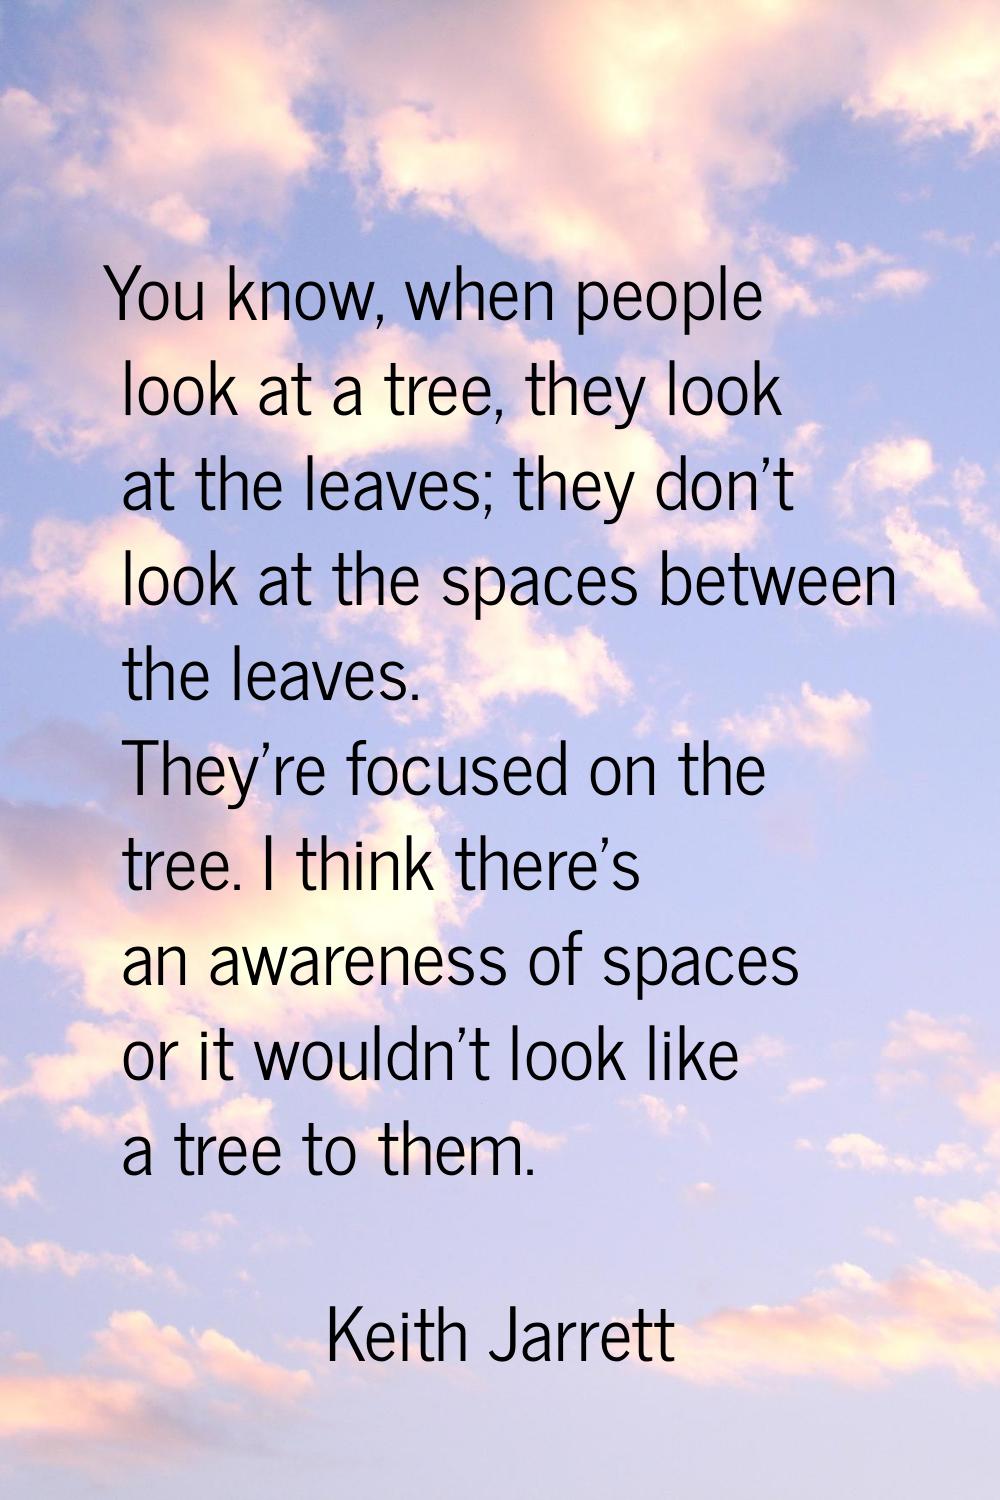 You know, when people look at a tree, they look at the leaves; they don't look at the spaces betwee